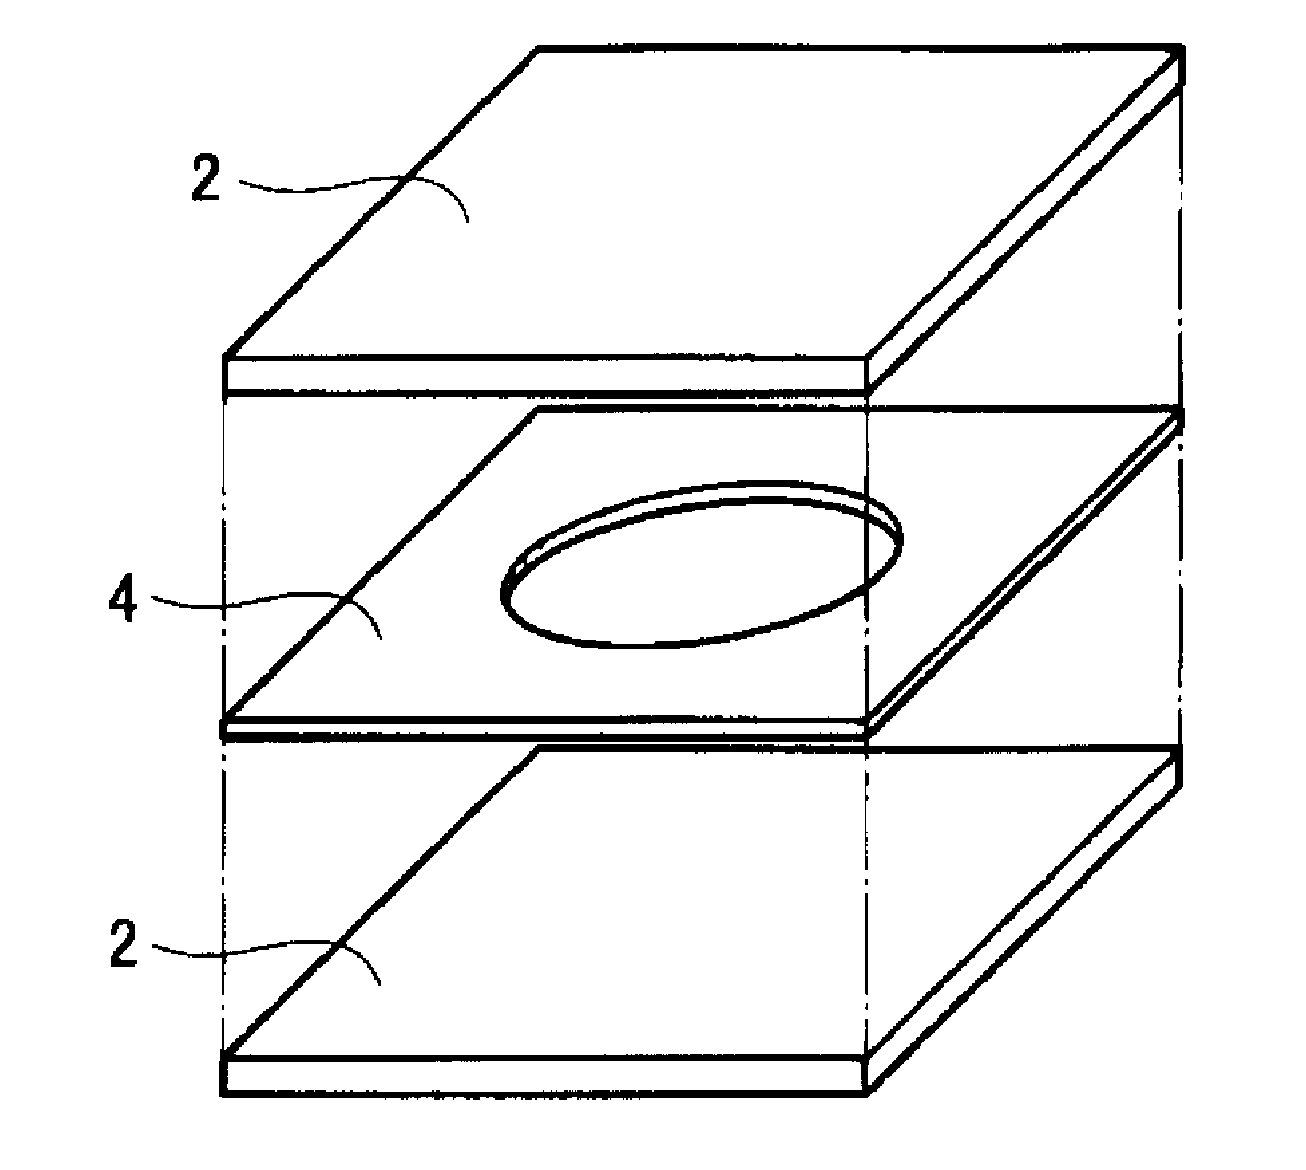 Piezoelectric polymer material and method for producing same